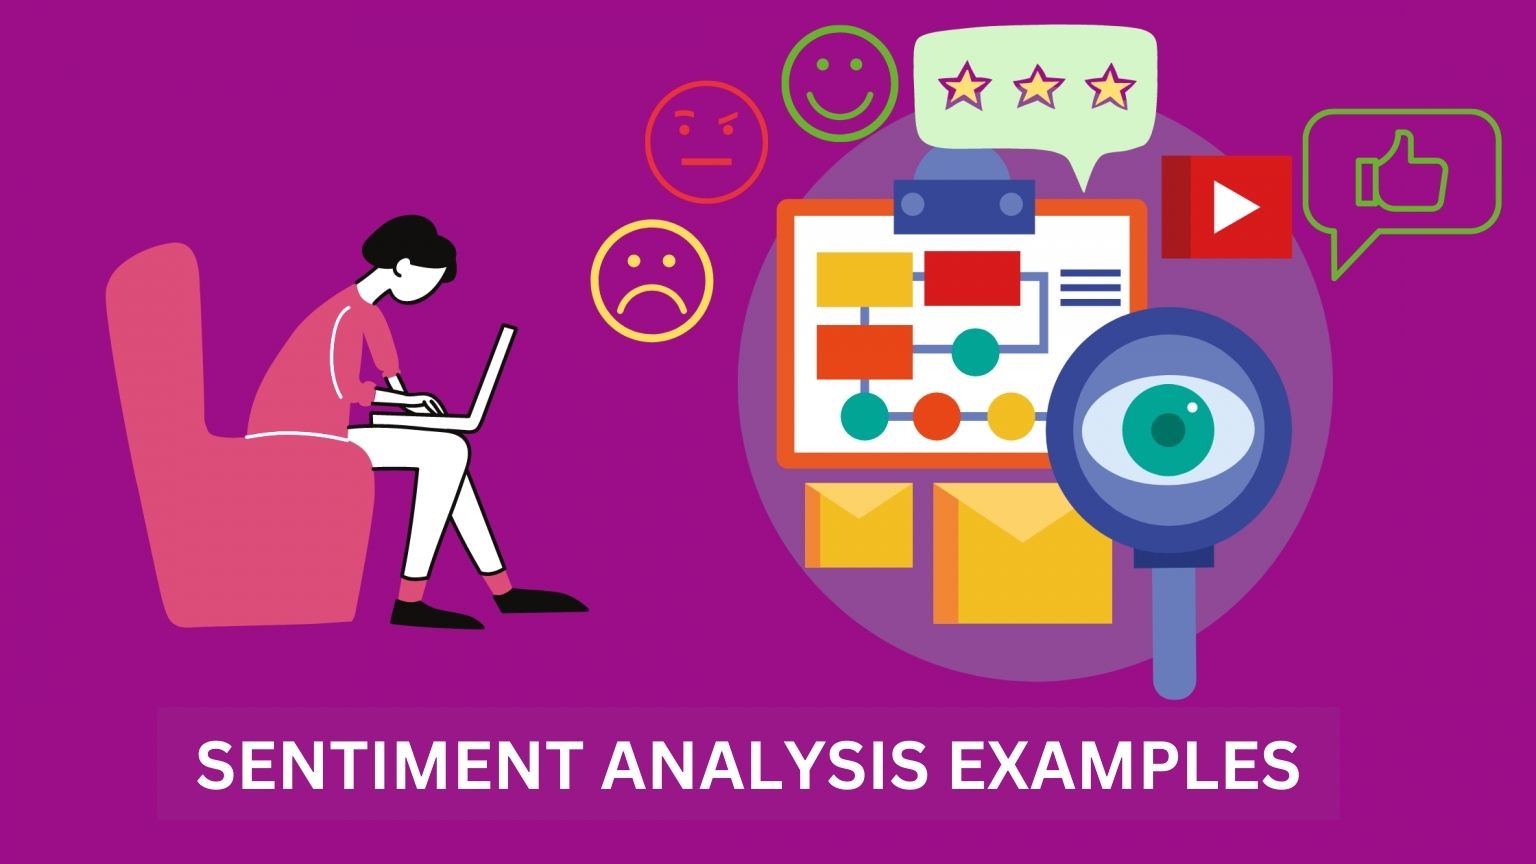 SENTIMENT ANALYSIS EXAMPLES